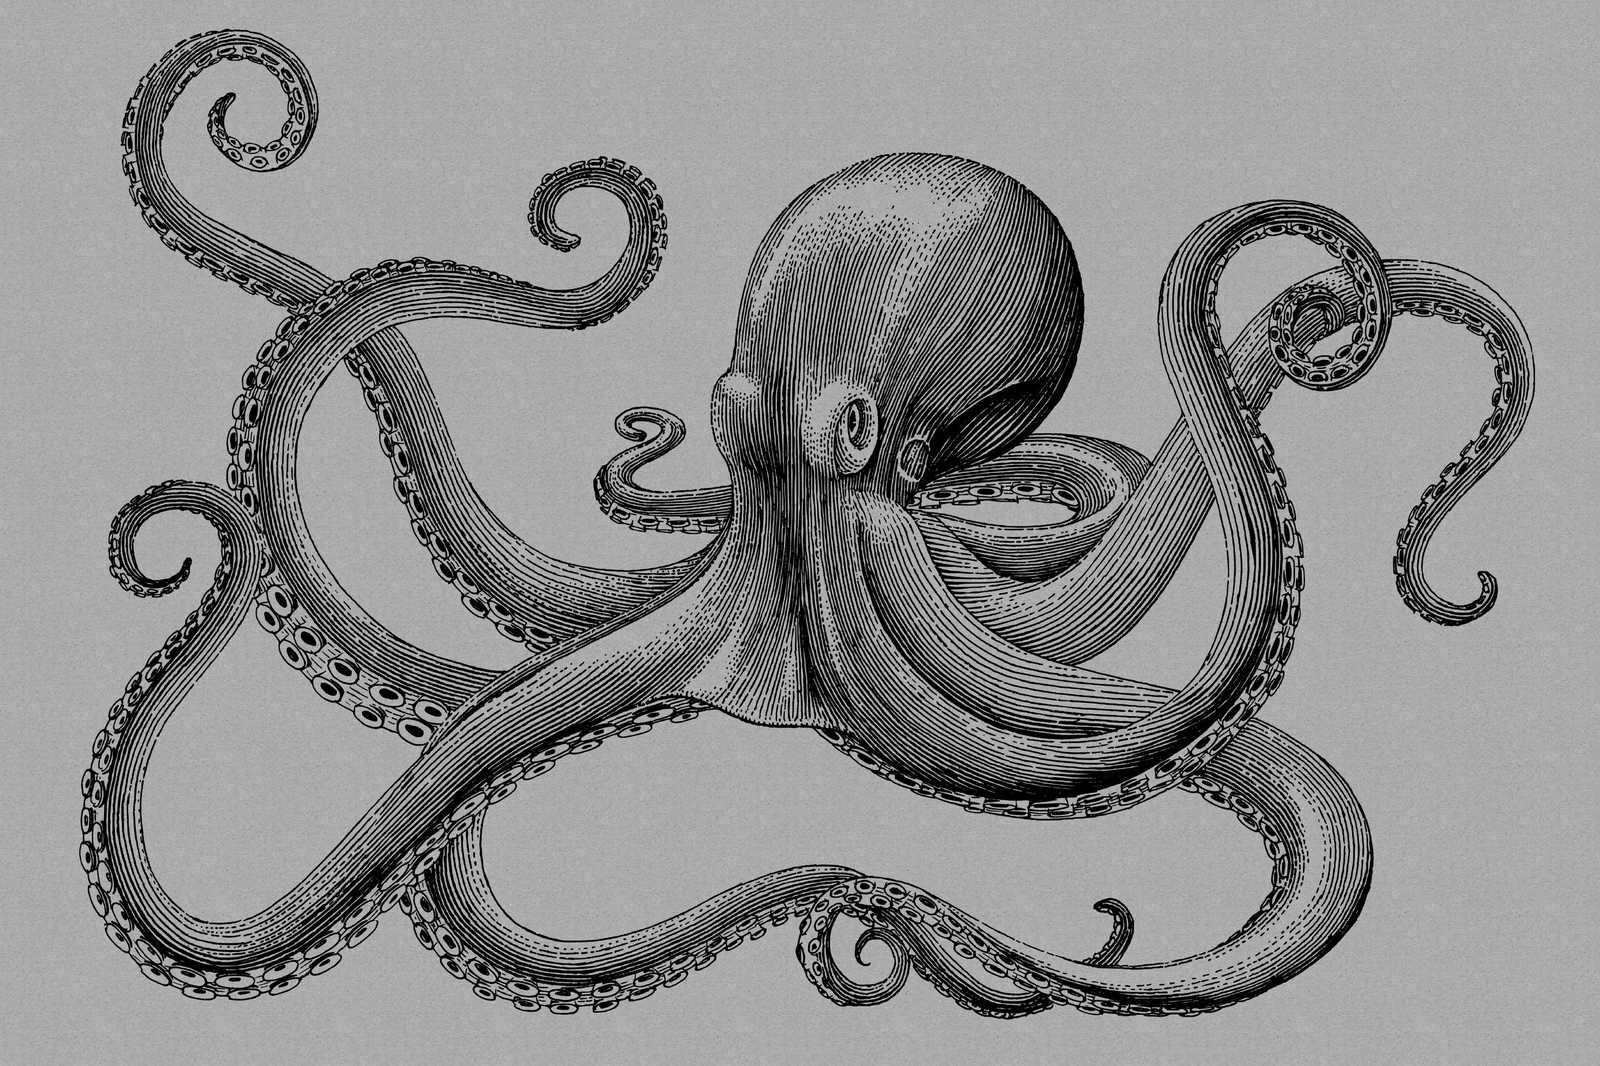             Jules 2 - modern octopus canvas picture in cardboard structure in drawing style - 0.90 m x 0.60 m
        